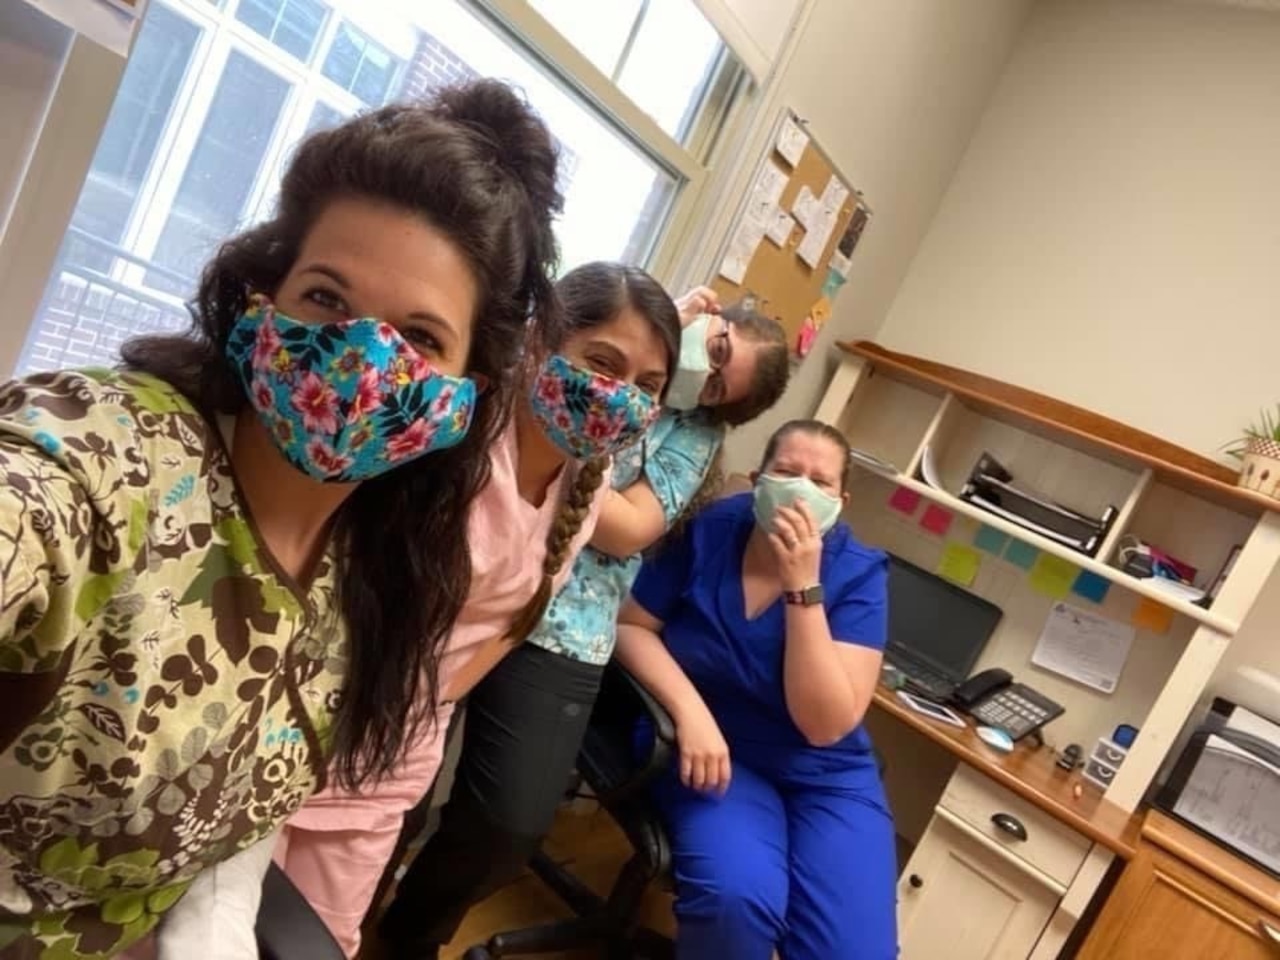 Health care workers pose wearing masks.